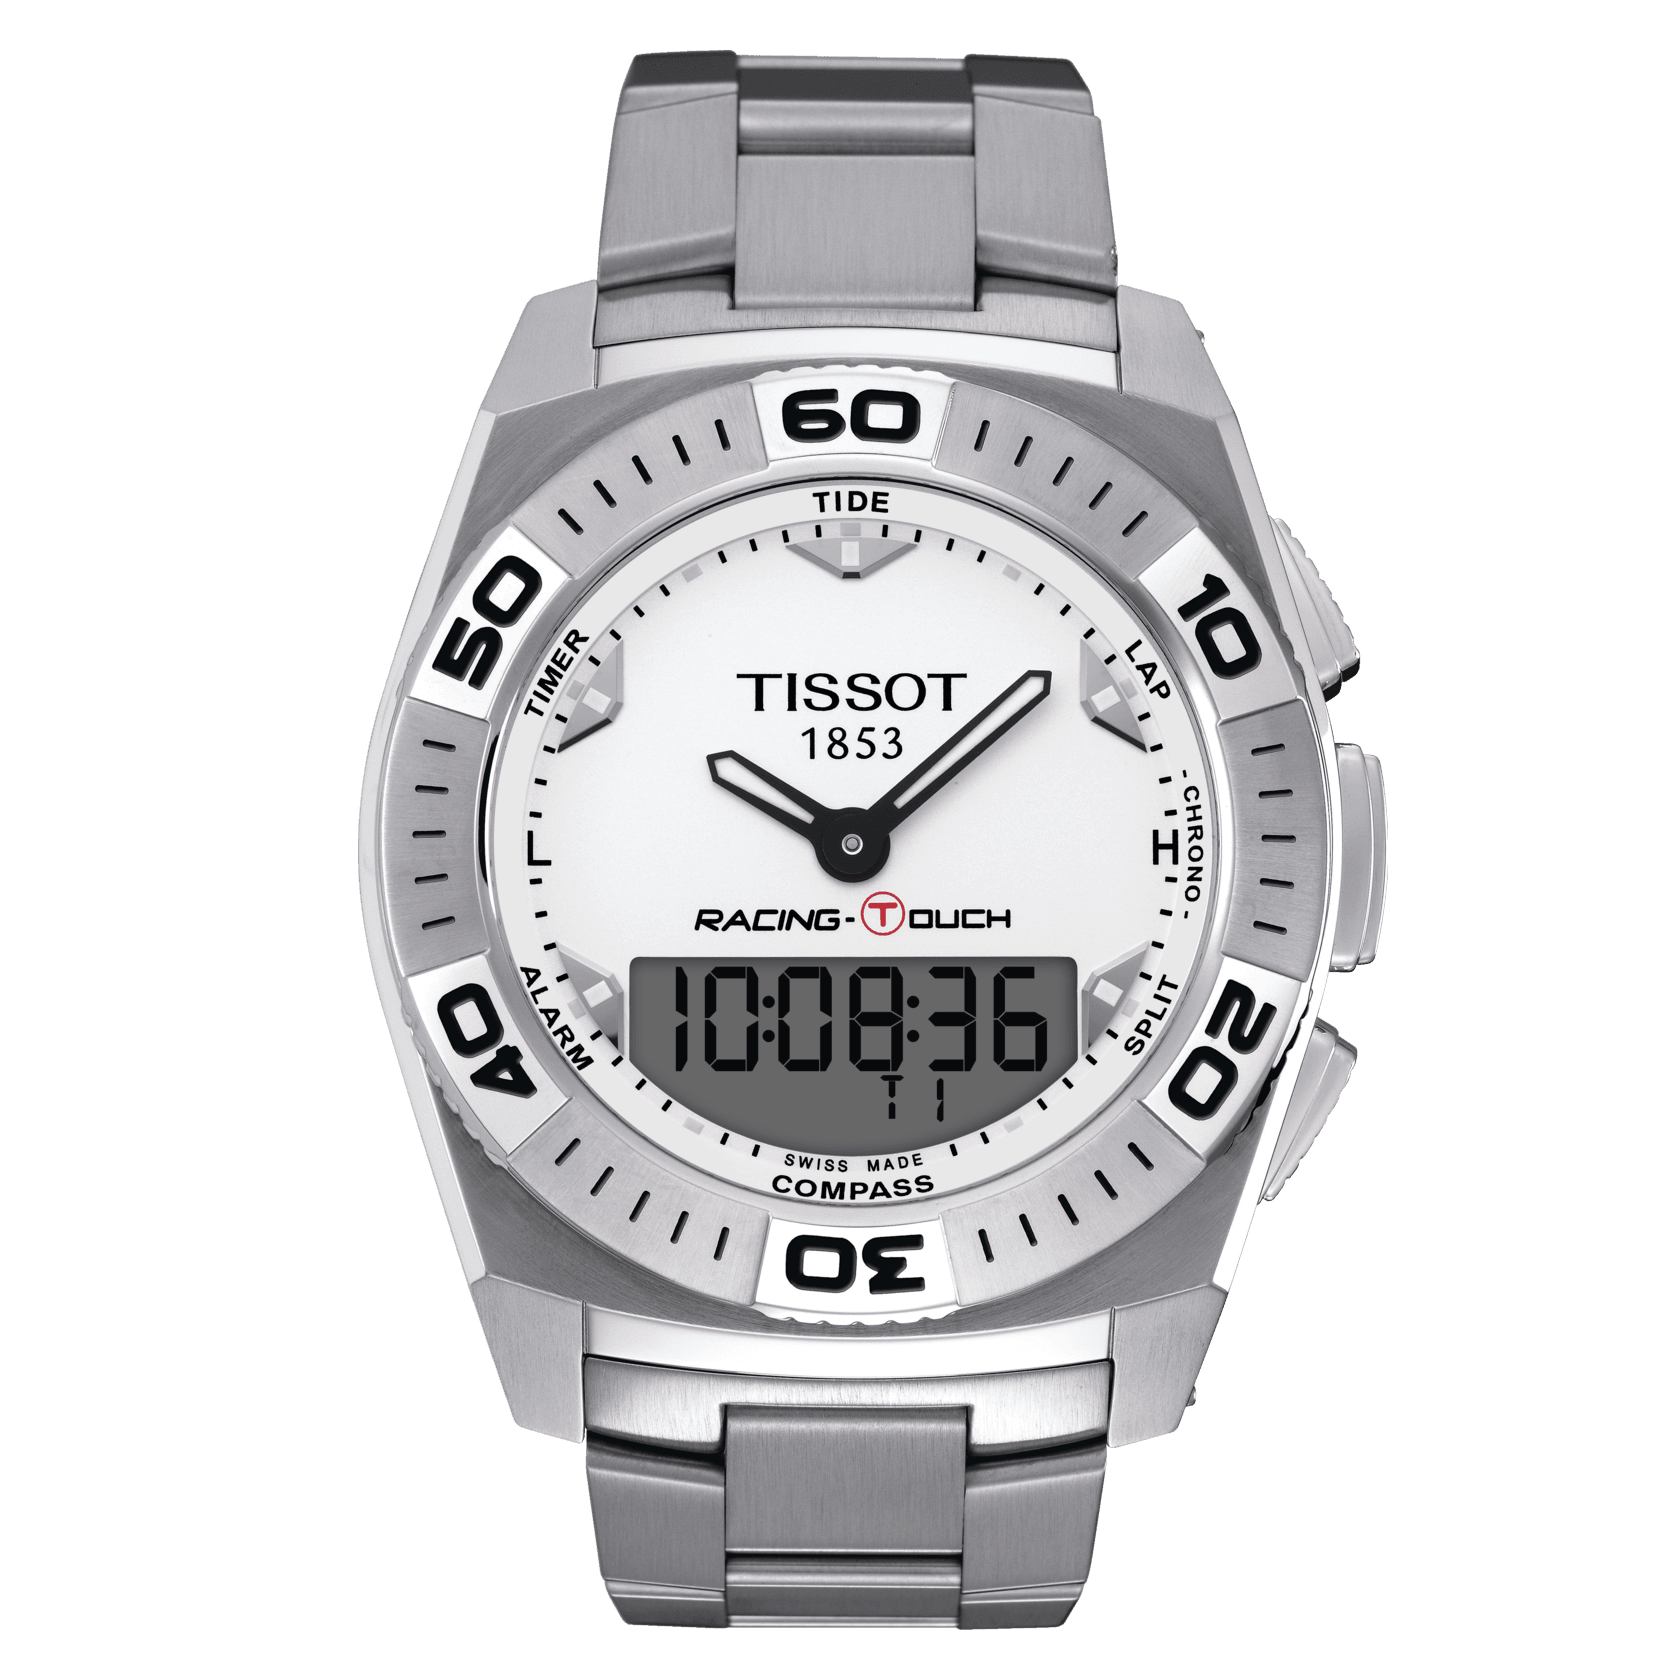 Tissot Racing T-Touch White Dial Men's Watch - Kamal Watch Company